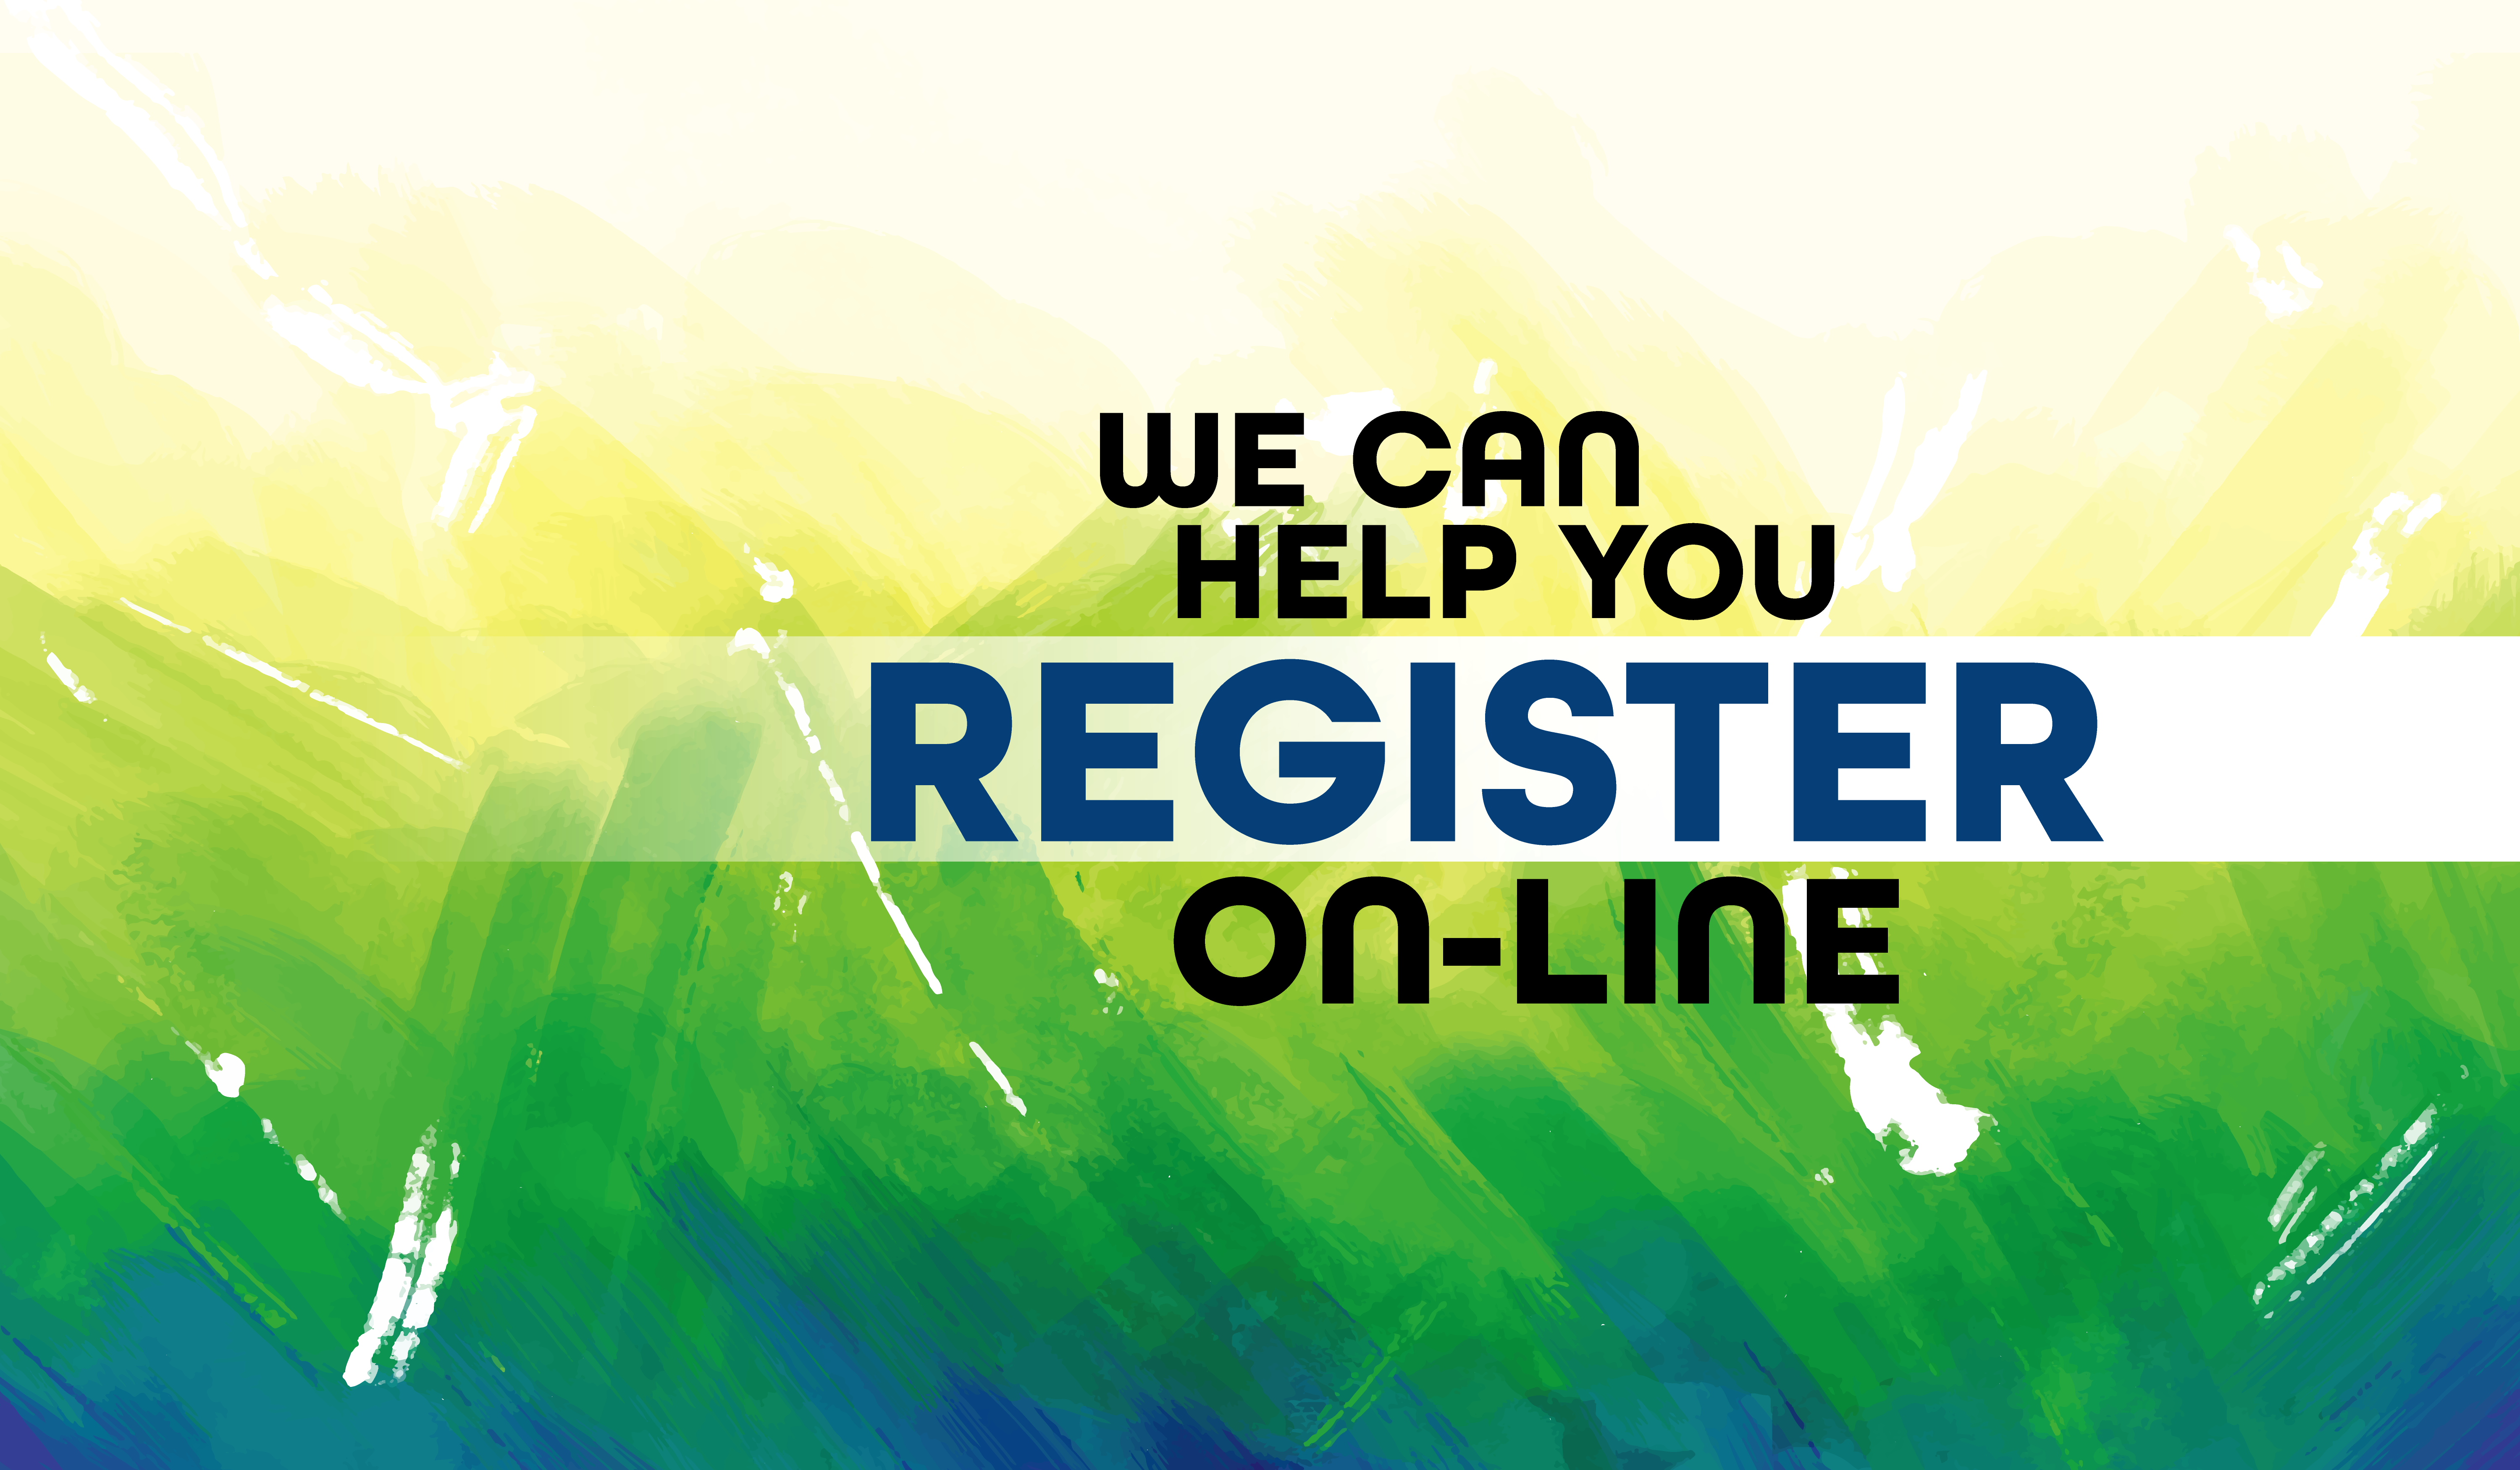 We can help you register online